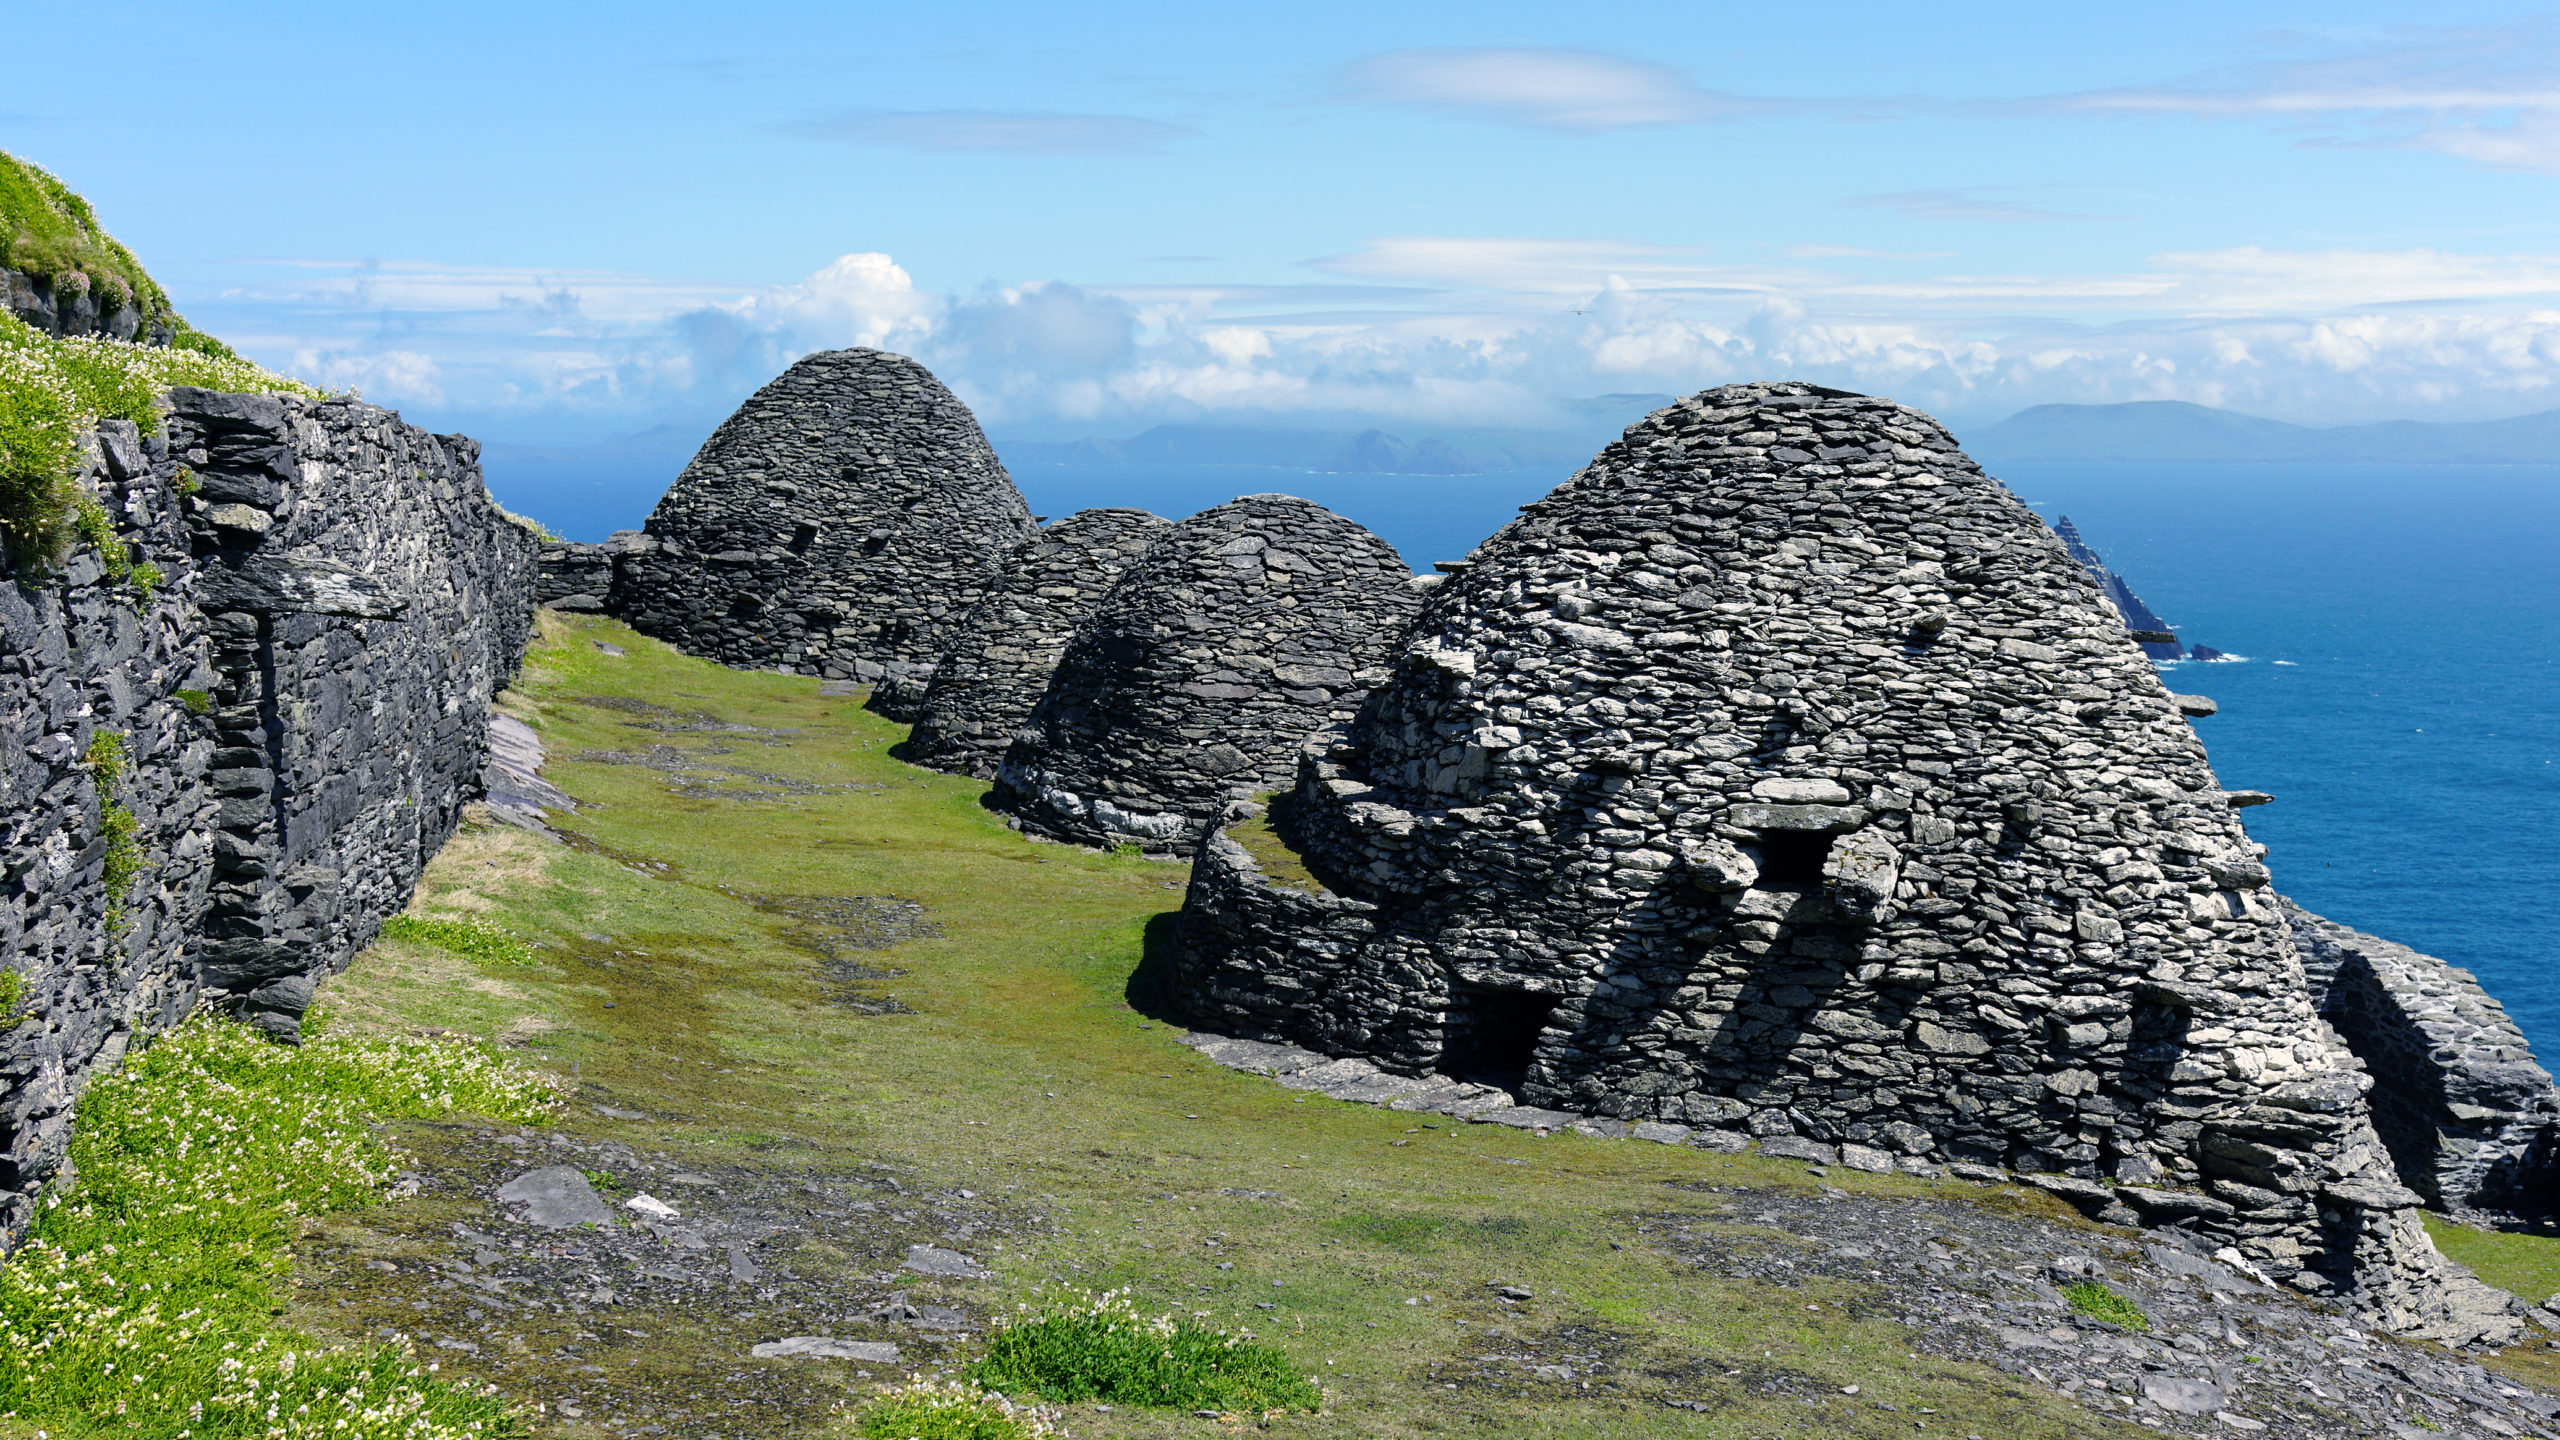 Skellig Michael monastery (Ireland), 6th–13th centuries (most of the stone construction dates to 8th–11th centuries)